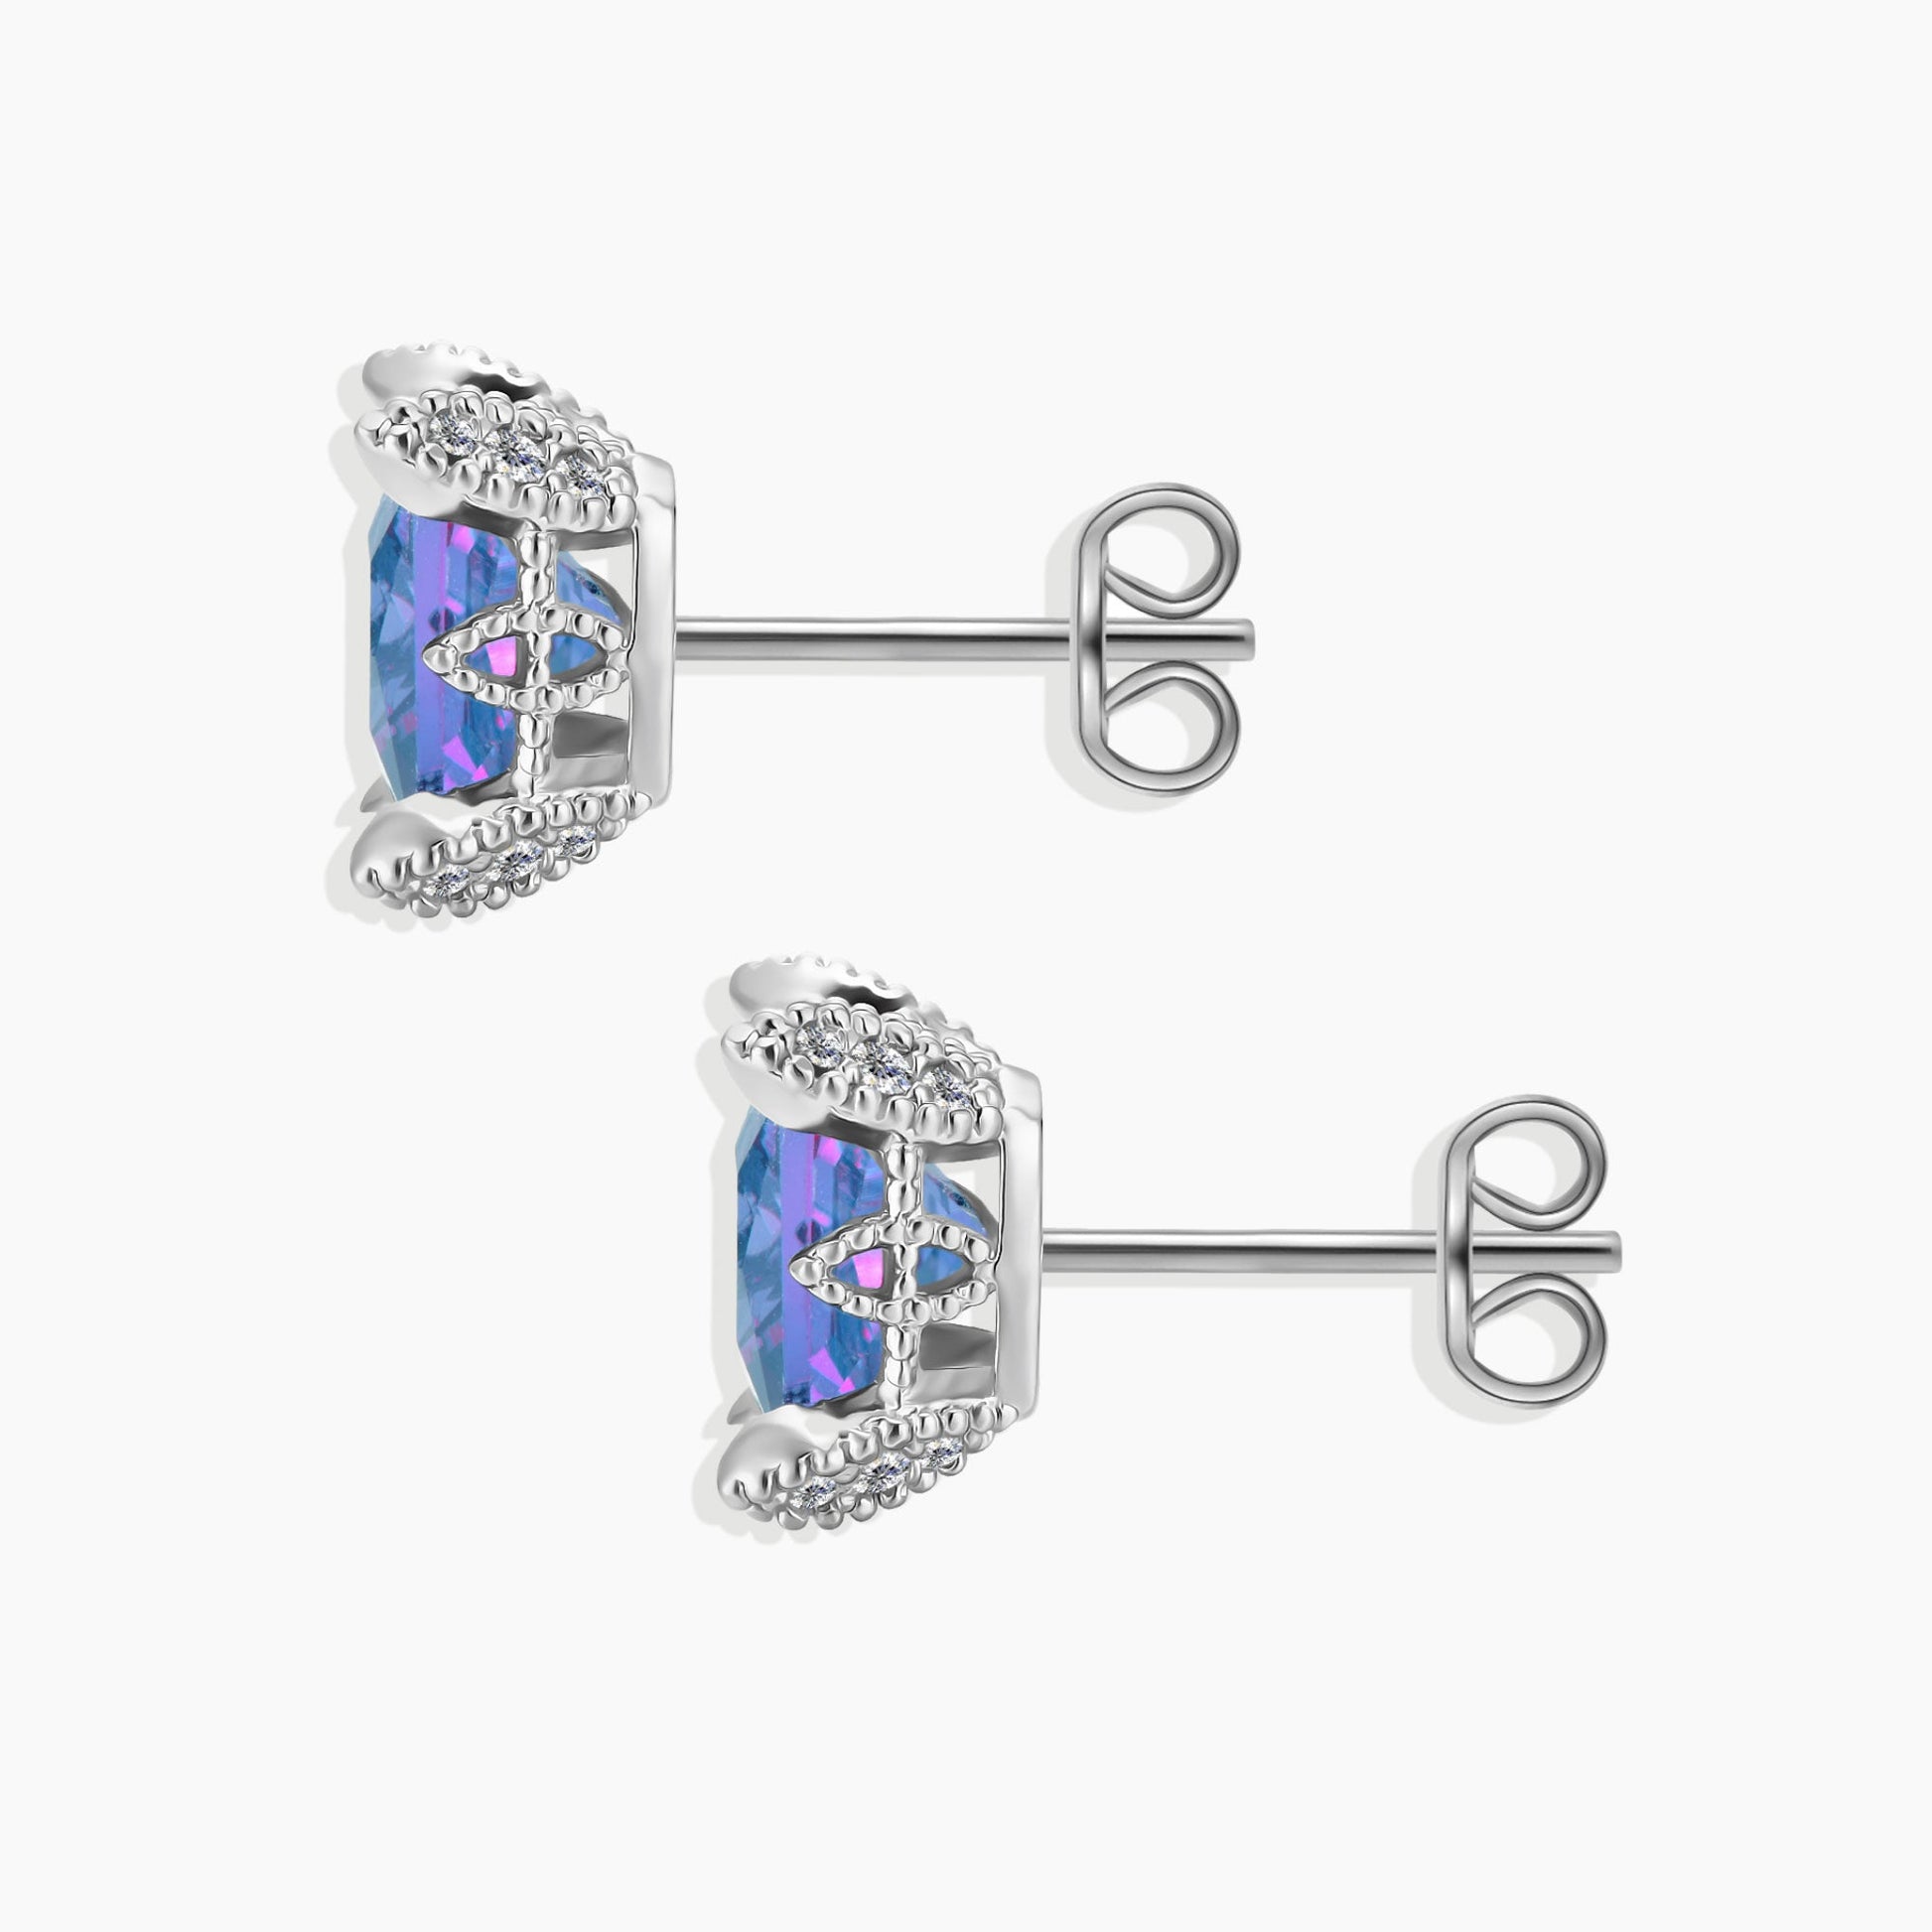 Side view of Alexandrite Square Studs, highlighting sterling silver setting